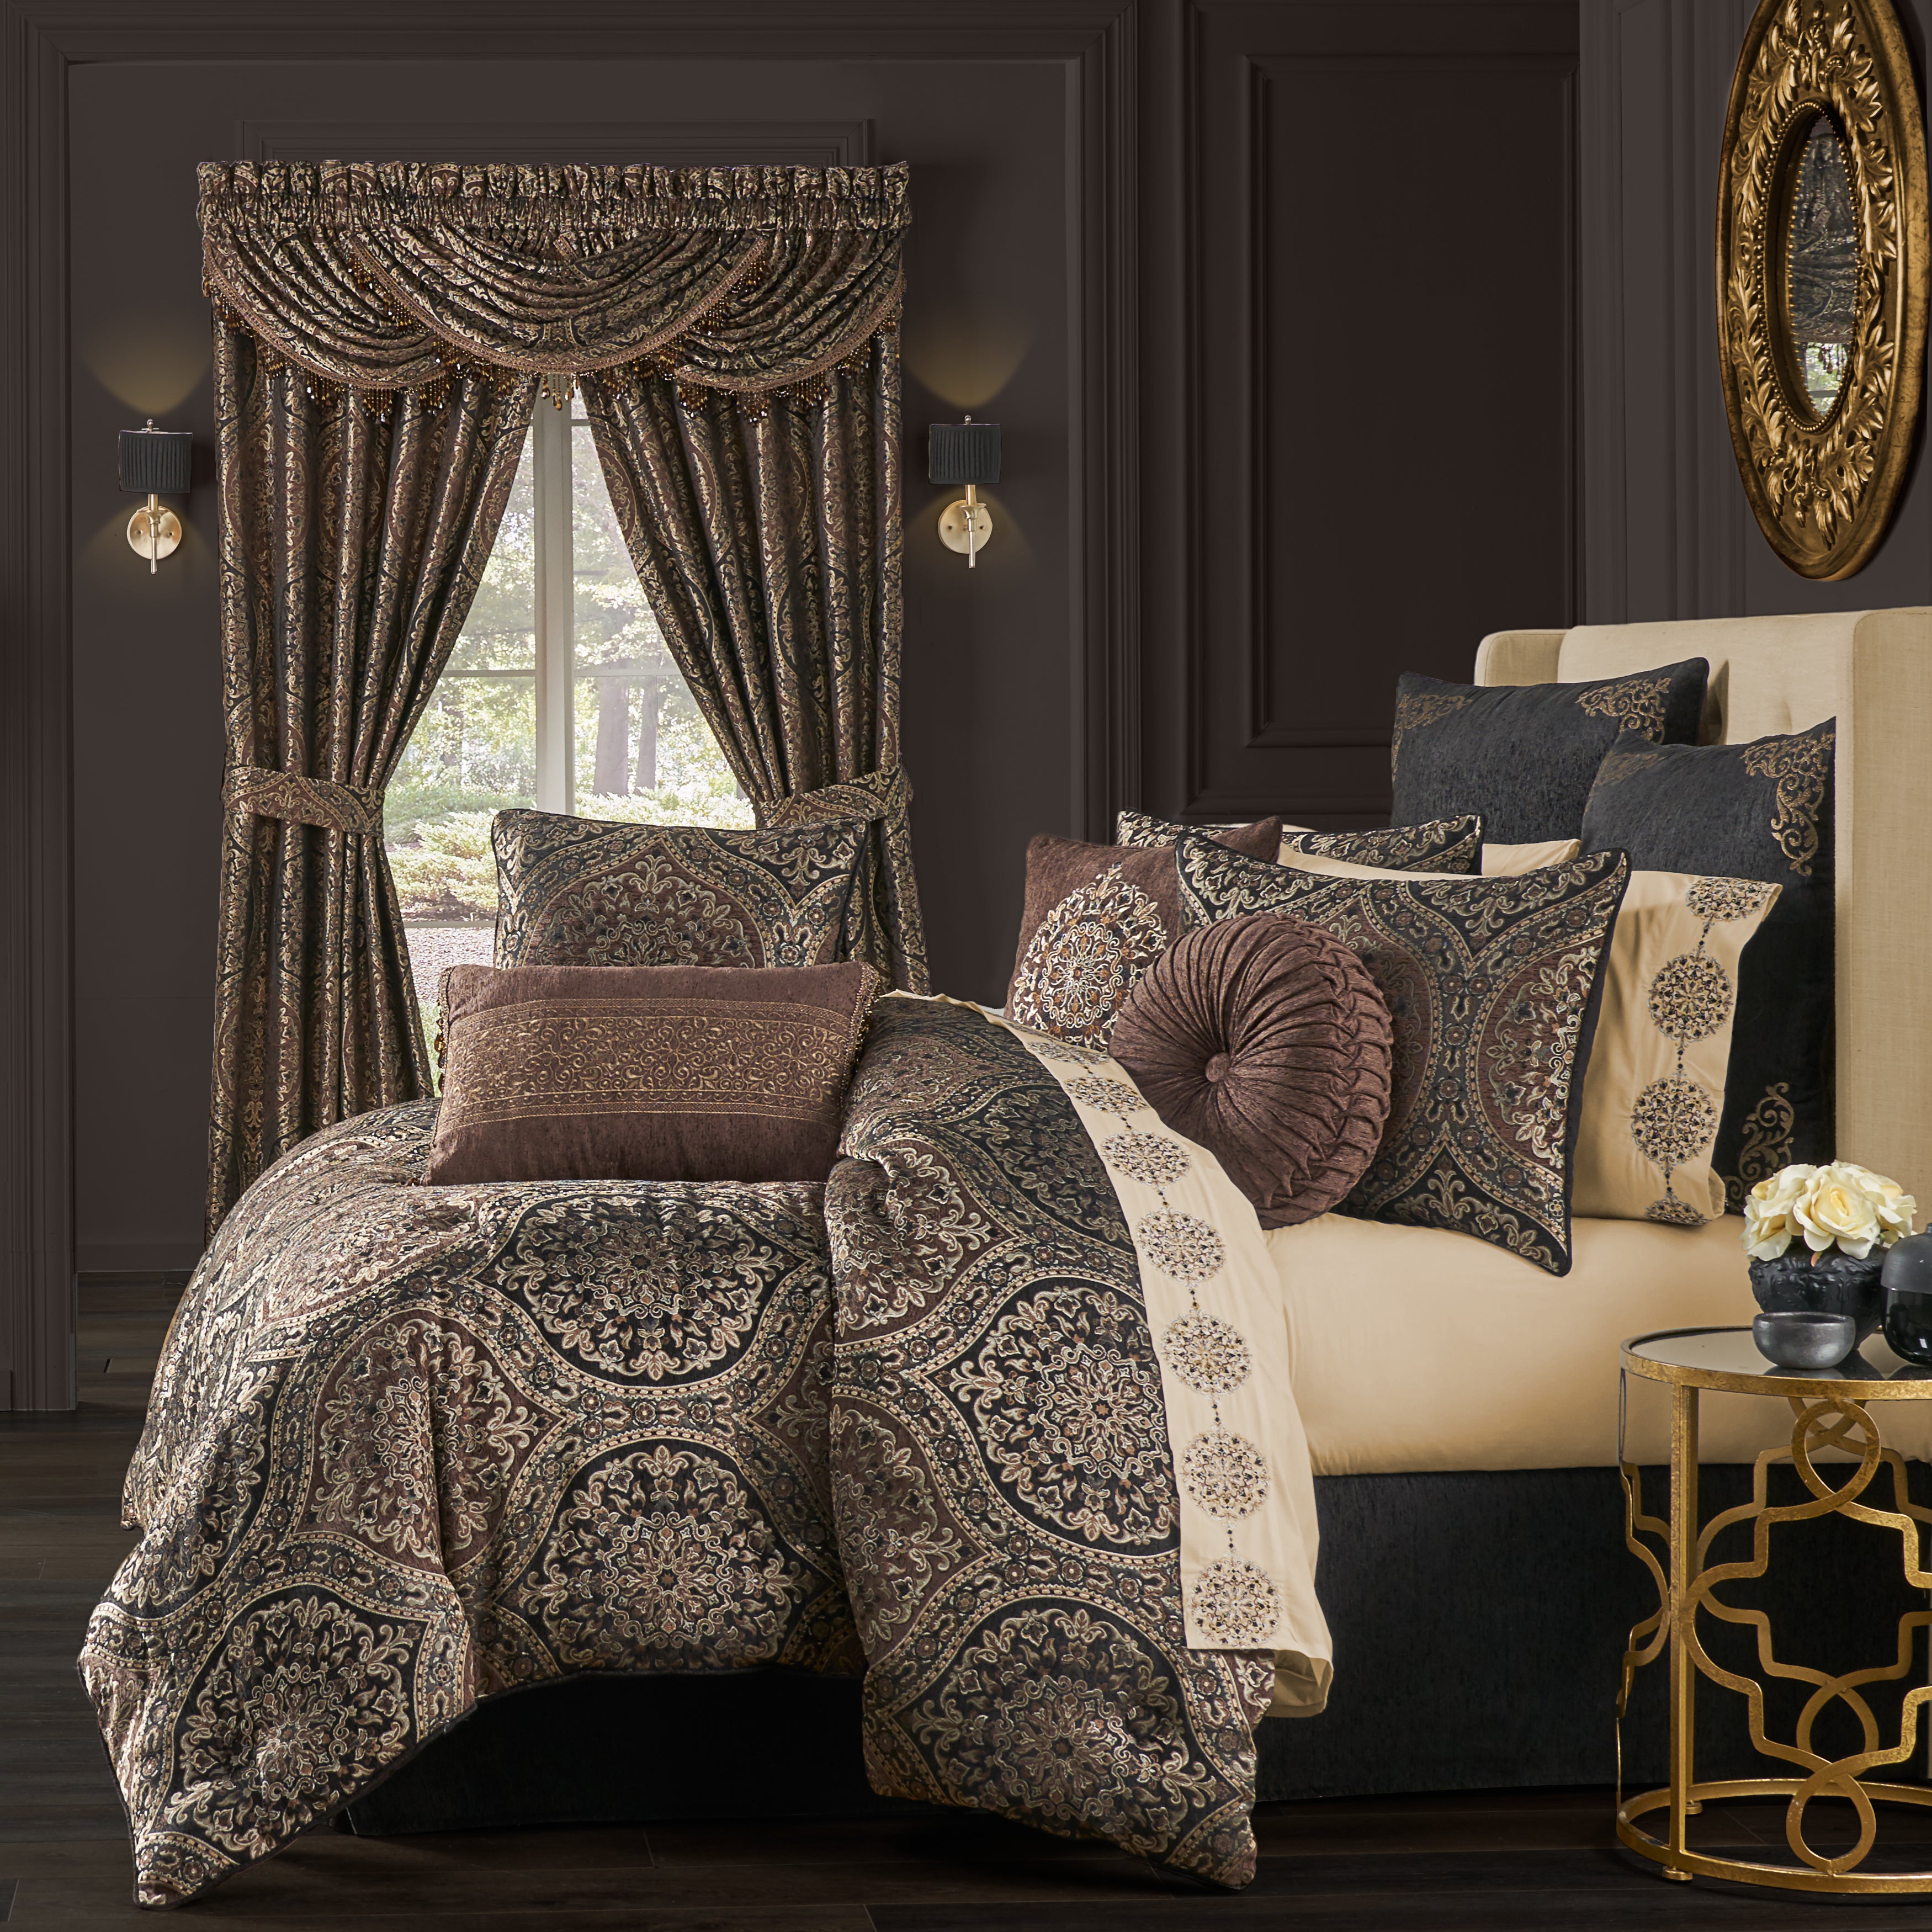 safhome Chocolate Brown 5 Pieces Pinch Pleated Emperor King Size Comforter  Set (Comforter + 4 Pillow Cases) 1200 Series Egyptian Cotton Duvet Insert :  : Home